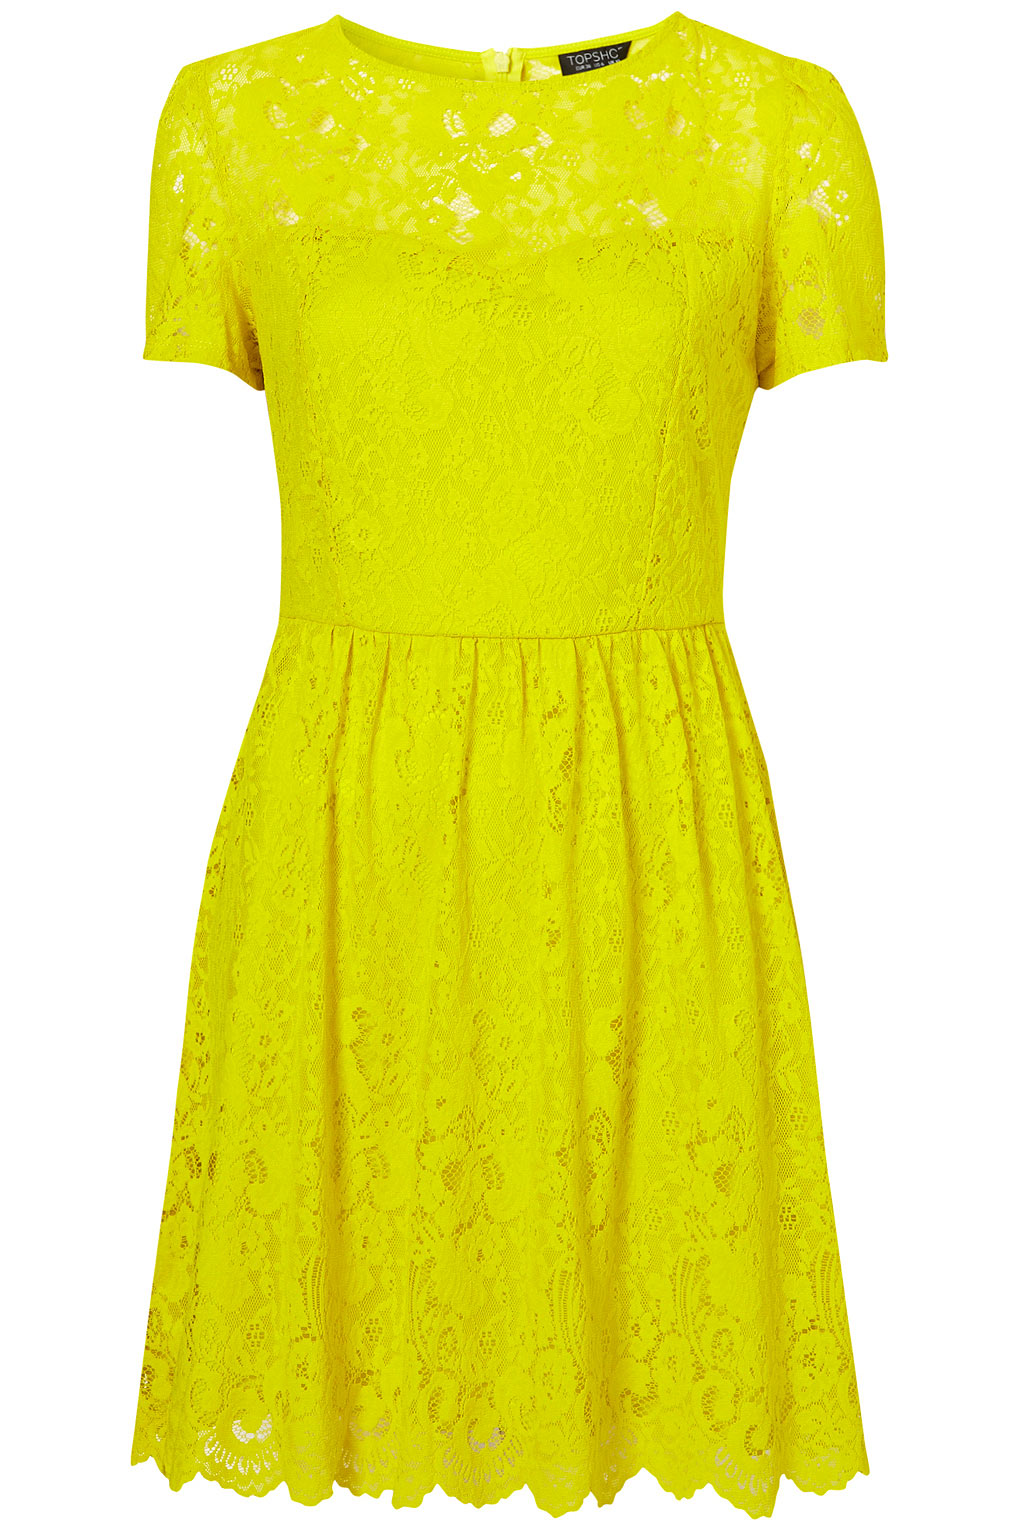 TOPSHOP Neon Lace Flippy Dress in Yellow - Lyst